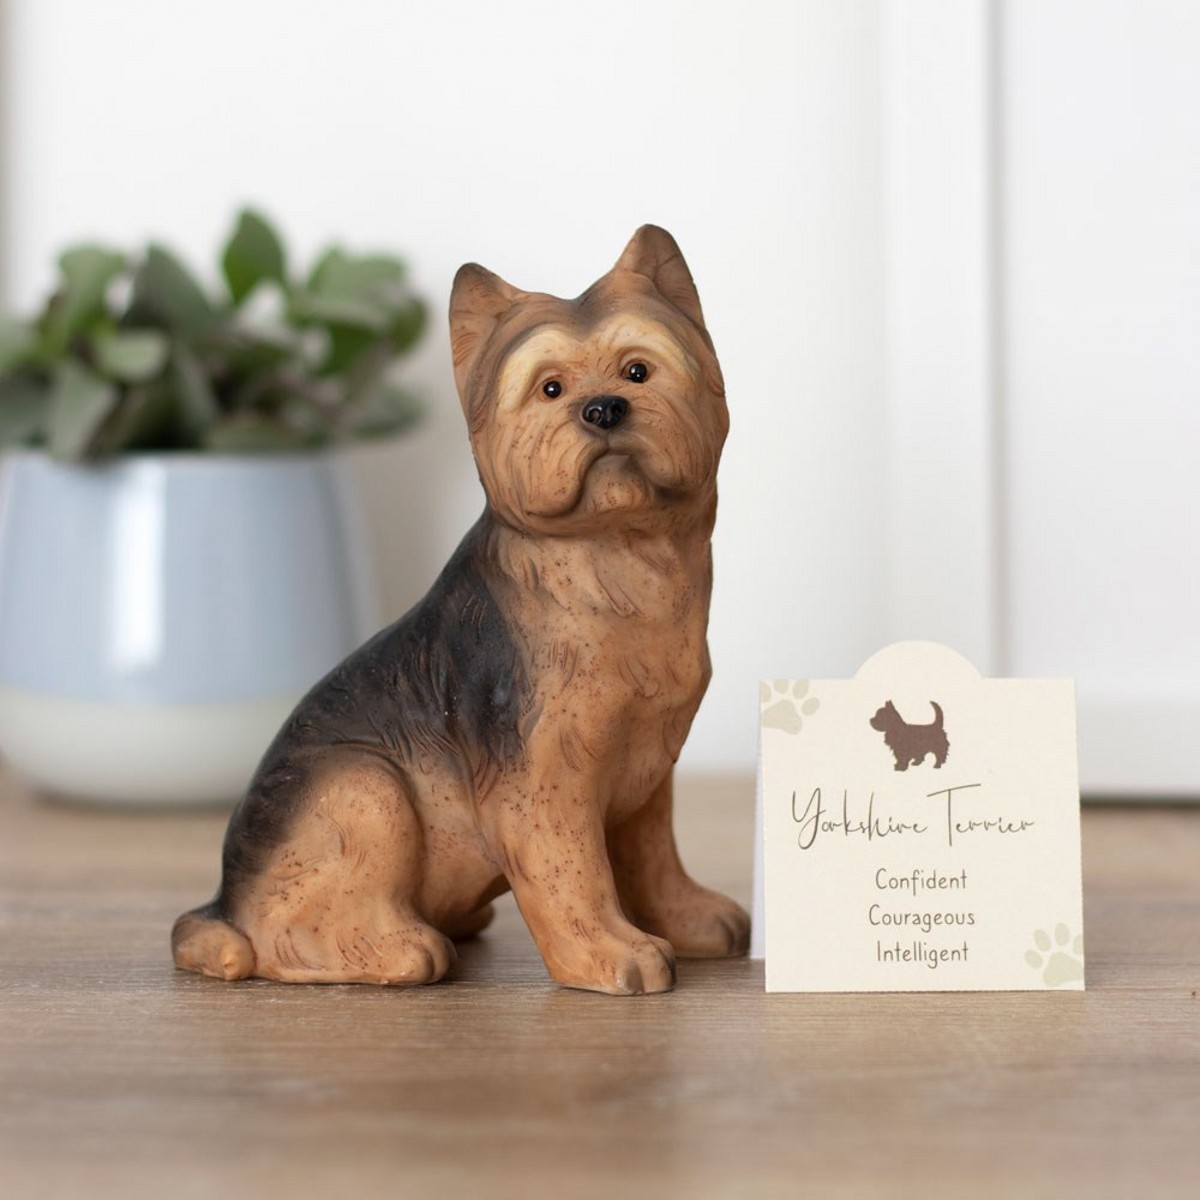 https://www.hawleygardencentre.co.uk/shop//User/Products/LrgImg/Gifts/Ornaments/FO-09623-DOG-ornament-yorkshire-terrier.jpg